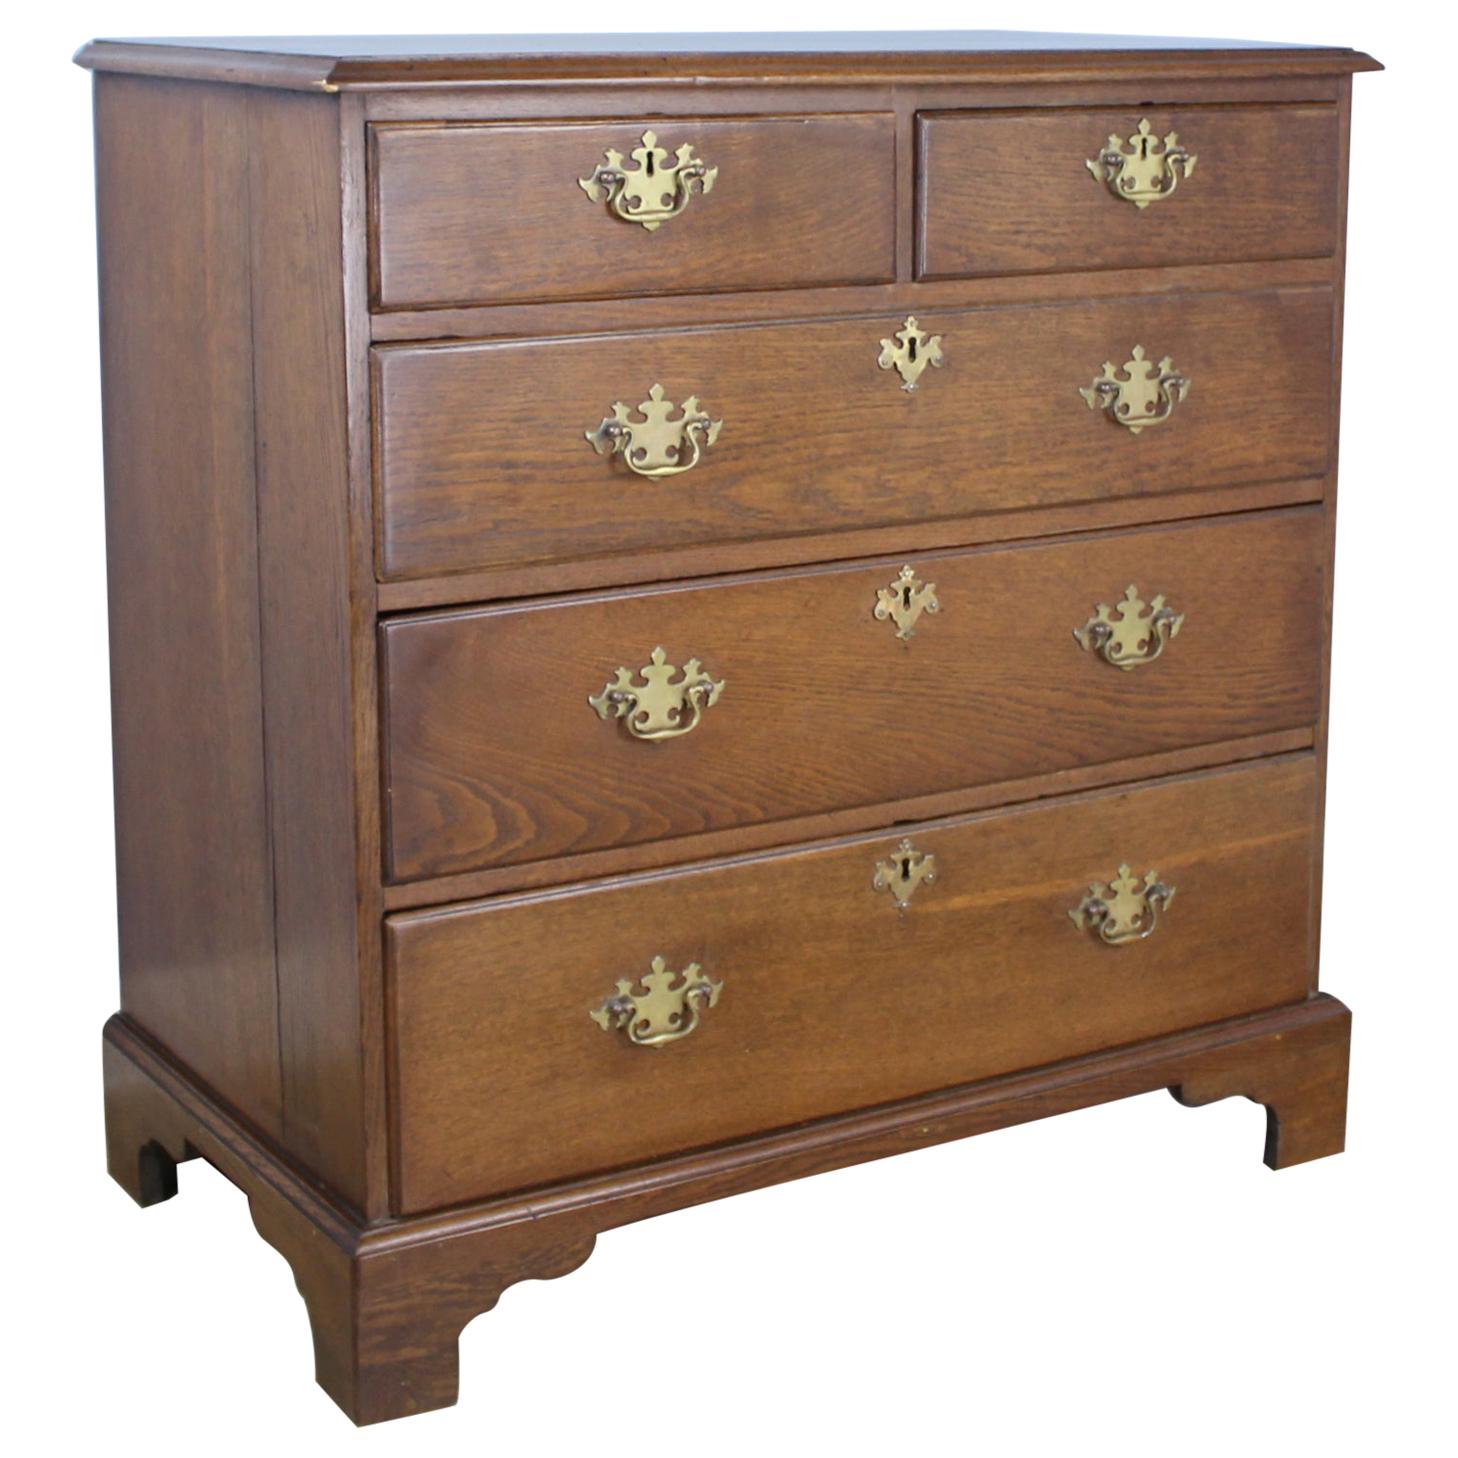 Period English Oak Chest of Drawers with Original Brasses